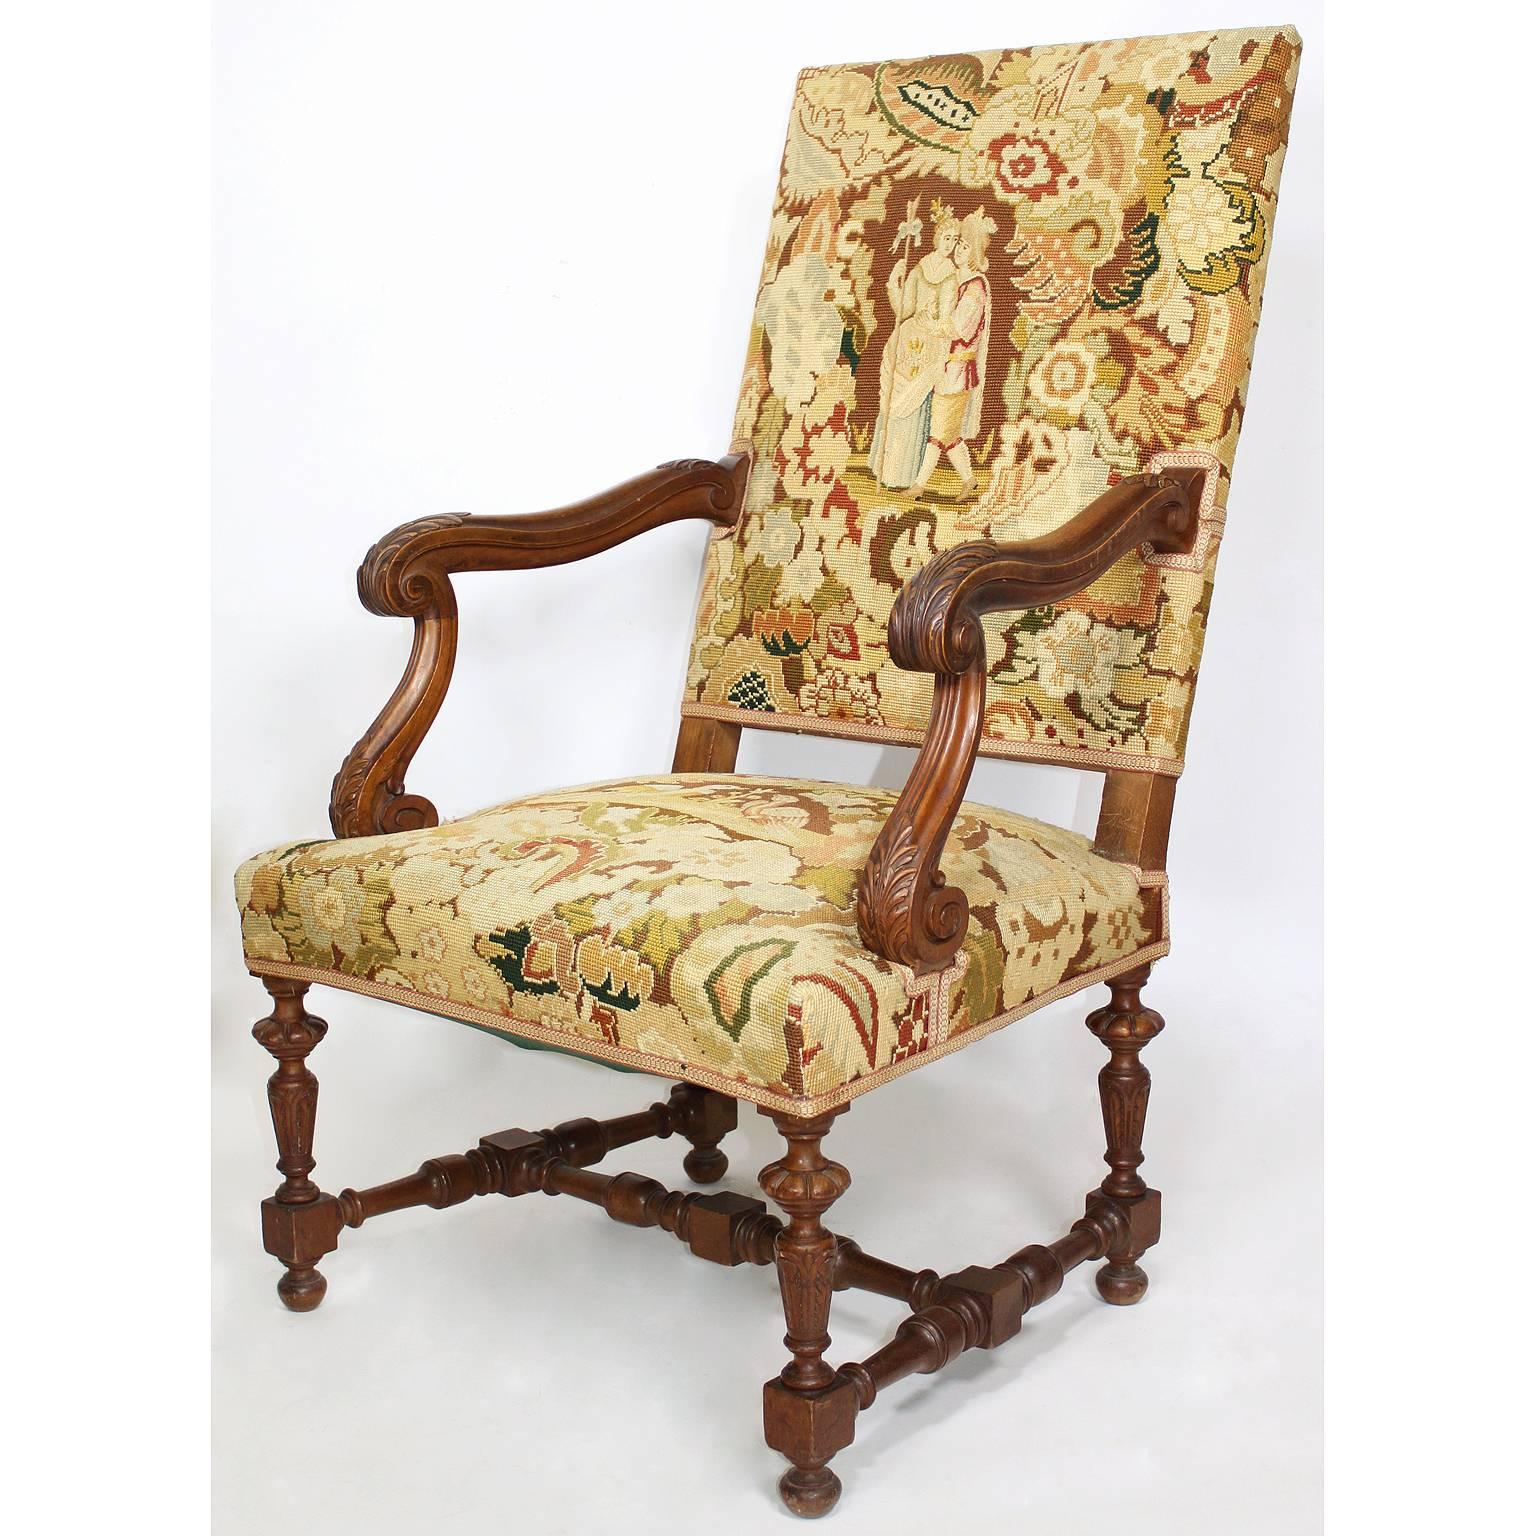 A pair of French 19th-20th century Baroque style carved walnut and needlepoint upholstered hall throne armchairs with raised carved armrests and fluted conjoint legs. The tapestries each depicting romantic courting scenes among trees and a floral